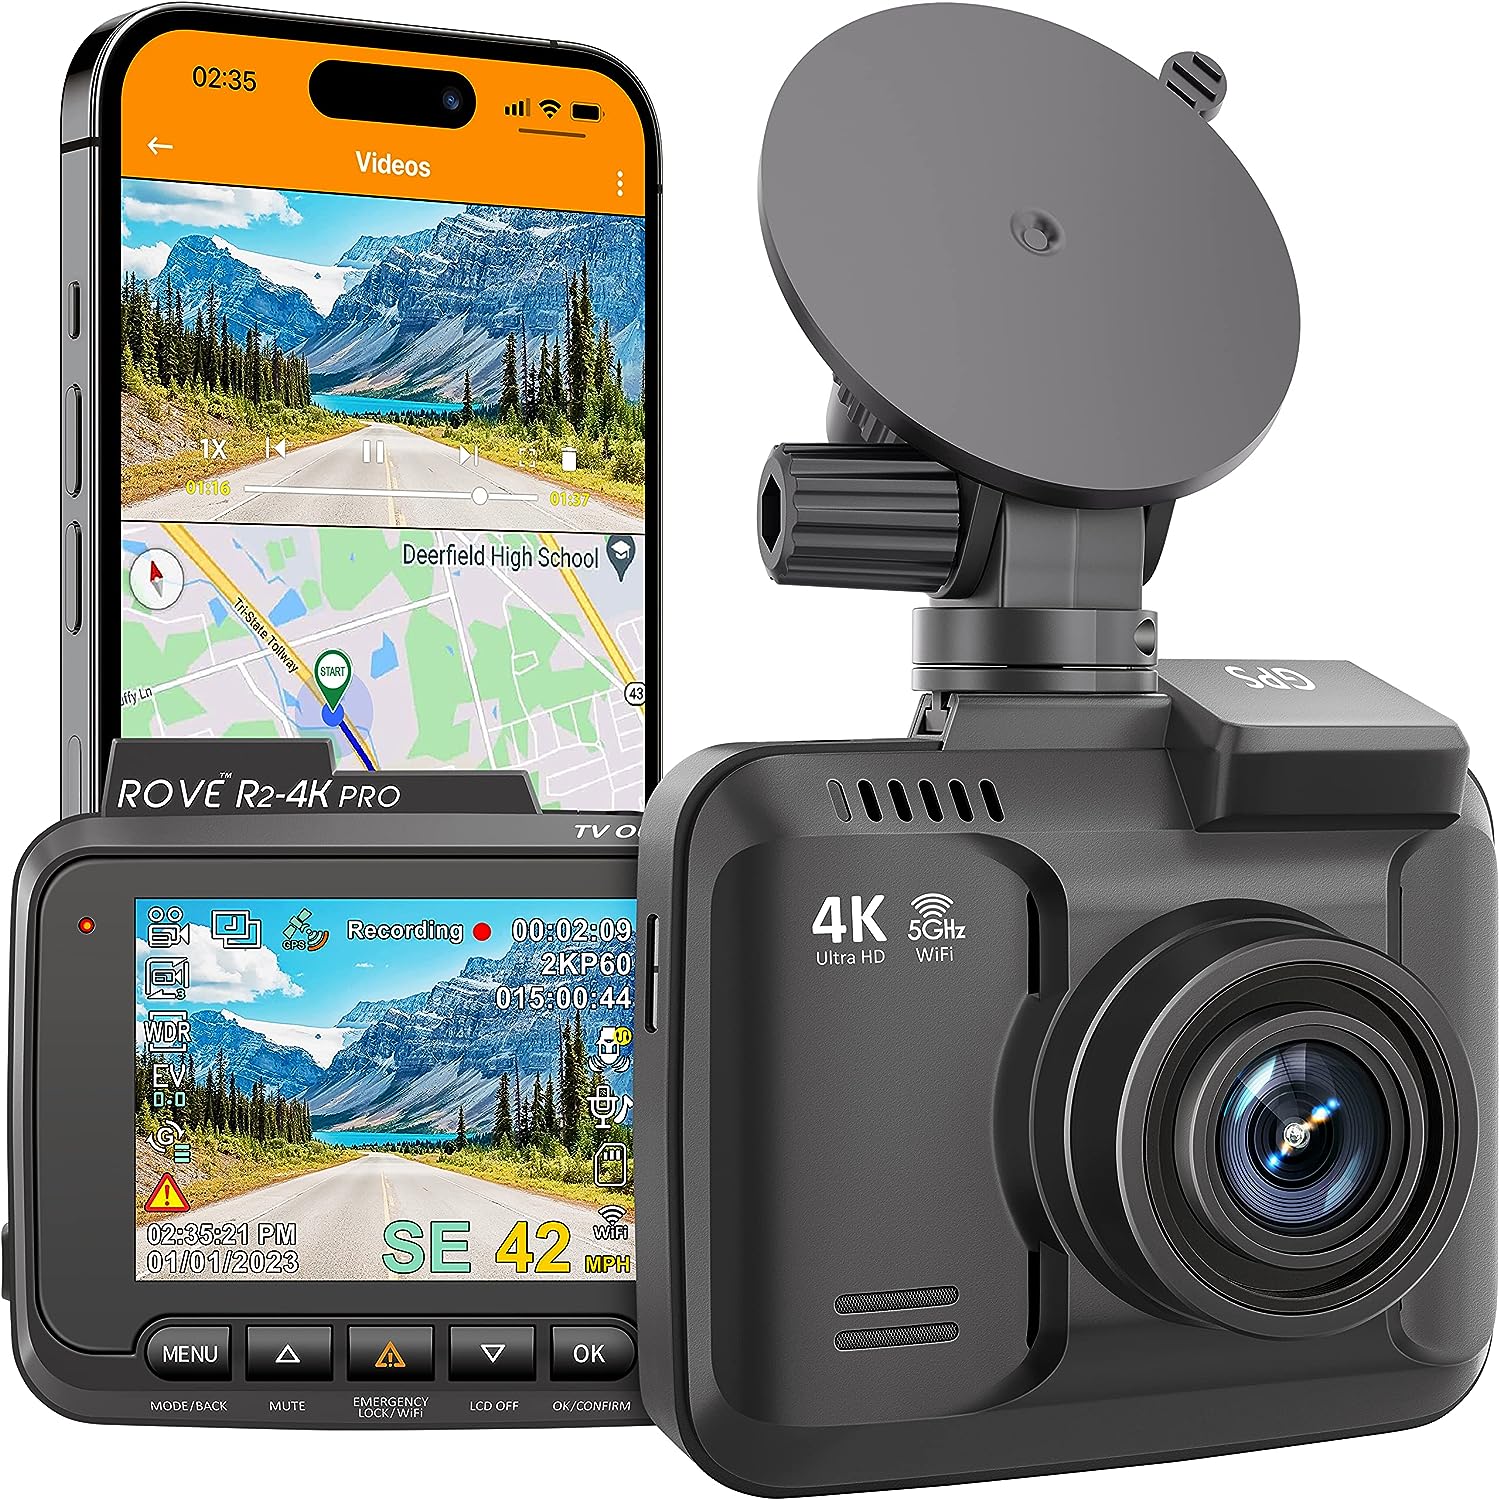 ROVE R2-4K PRO Dash Cam, Built-in GPS, 5G WiFi Dash Camera for Cars, 2160P UHD 30fps Dashcam with APP, 2.4 IPS Screen, Night Vision, WDR, 150° Wide Angle, 24-Hr Parking Mode, Supports 512GB Max